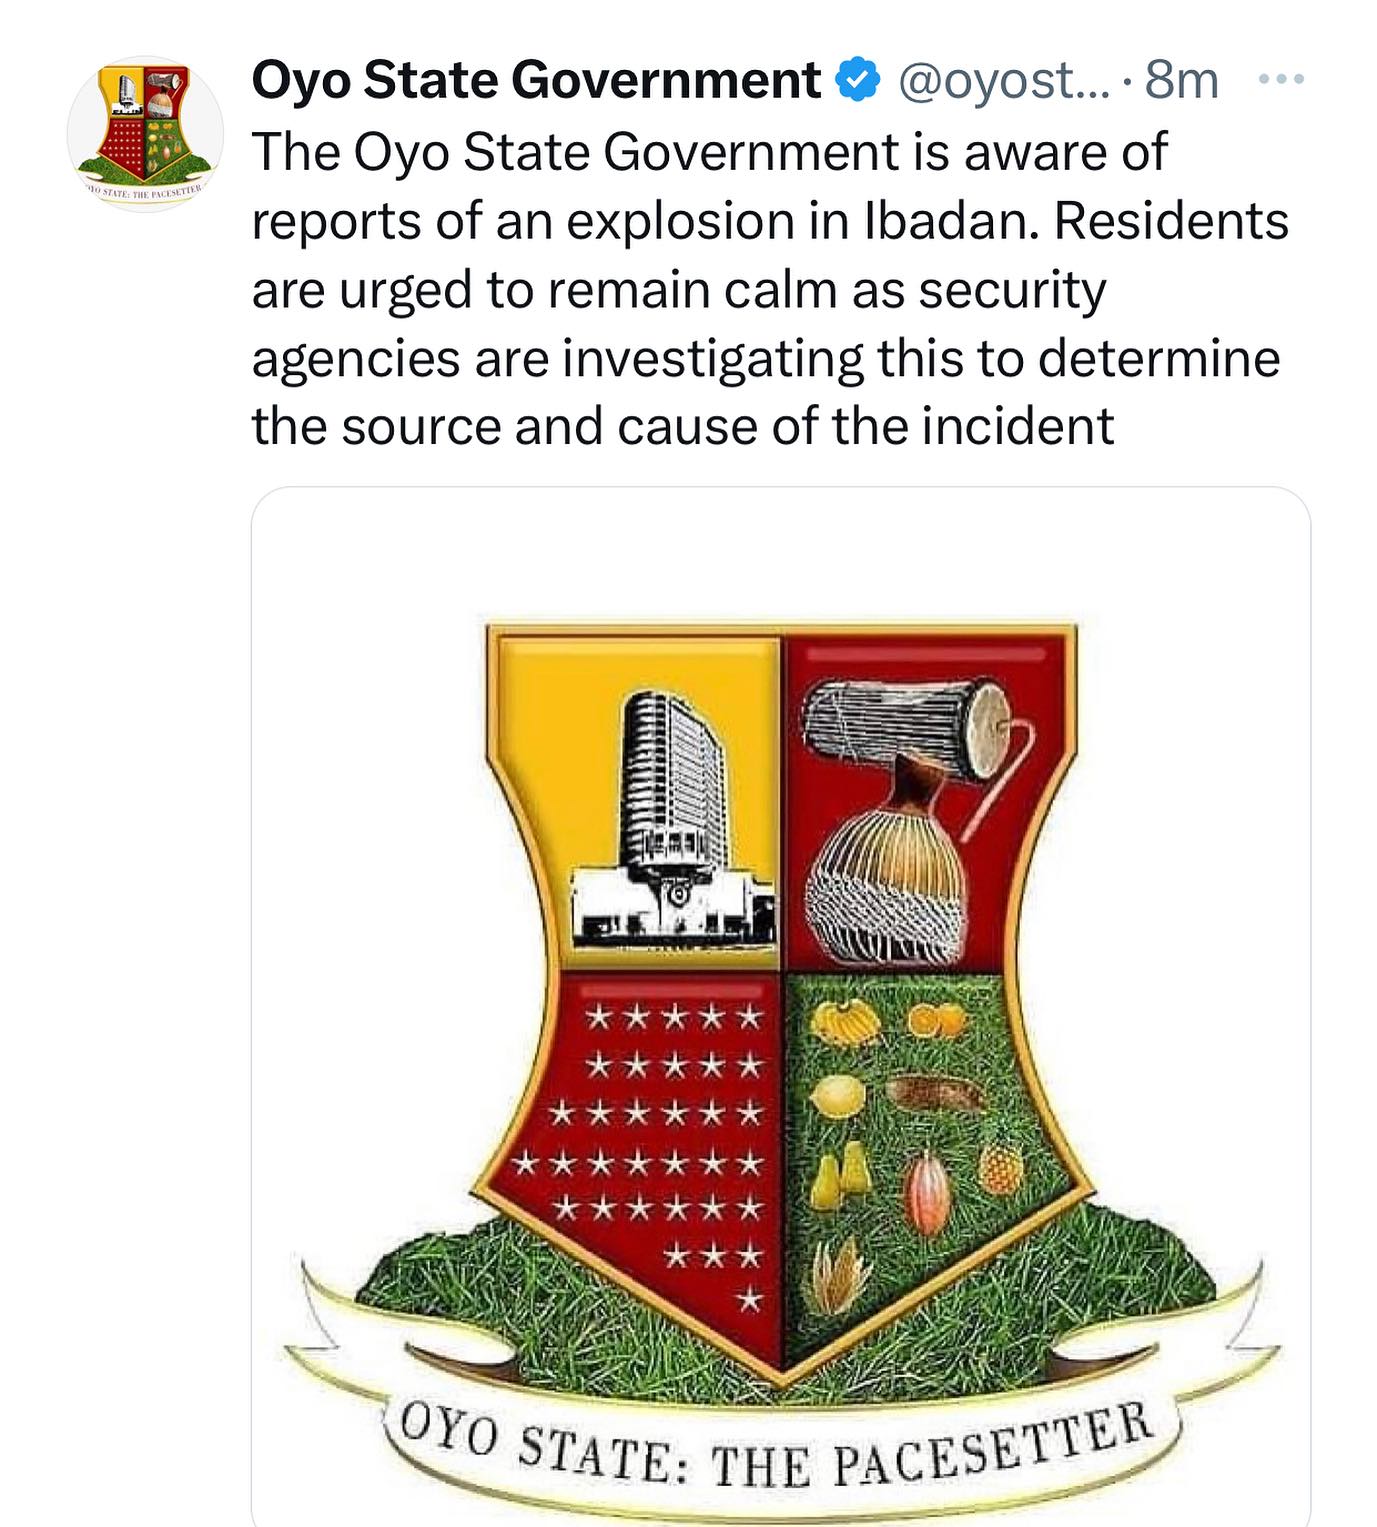 Oyo state government confirm reports of explosion in Ibadan, the state capital